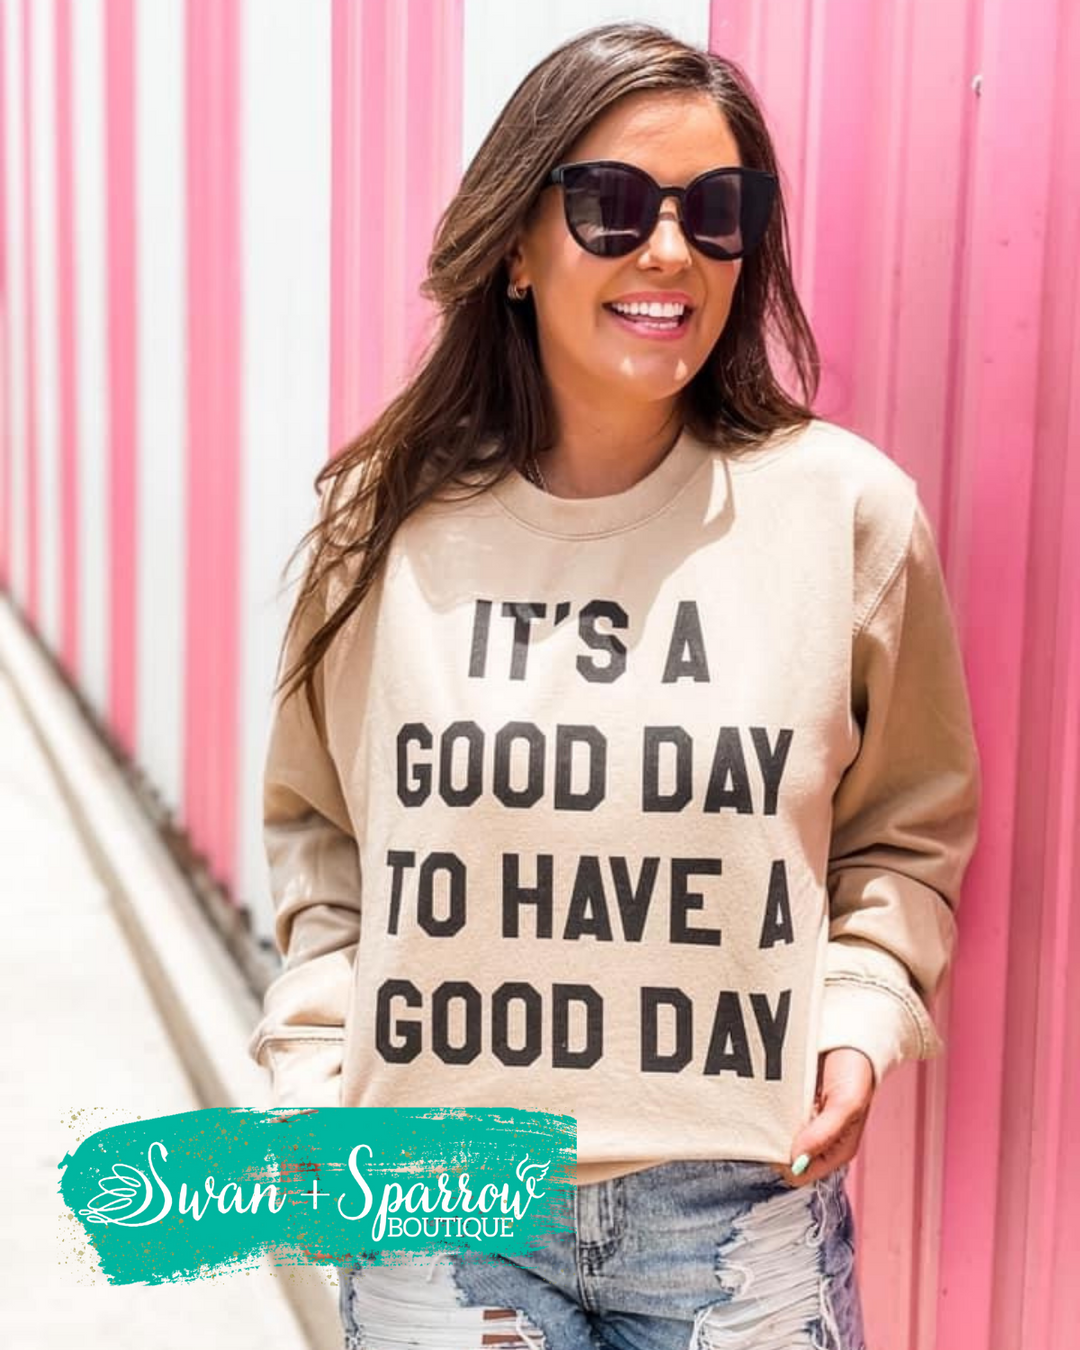 It's a Good Day to have a Good Day Sweatshirt